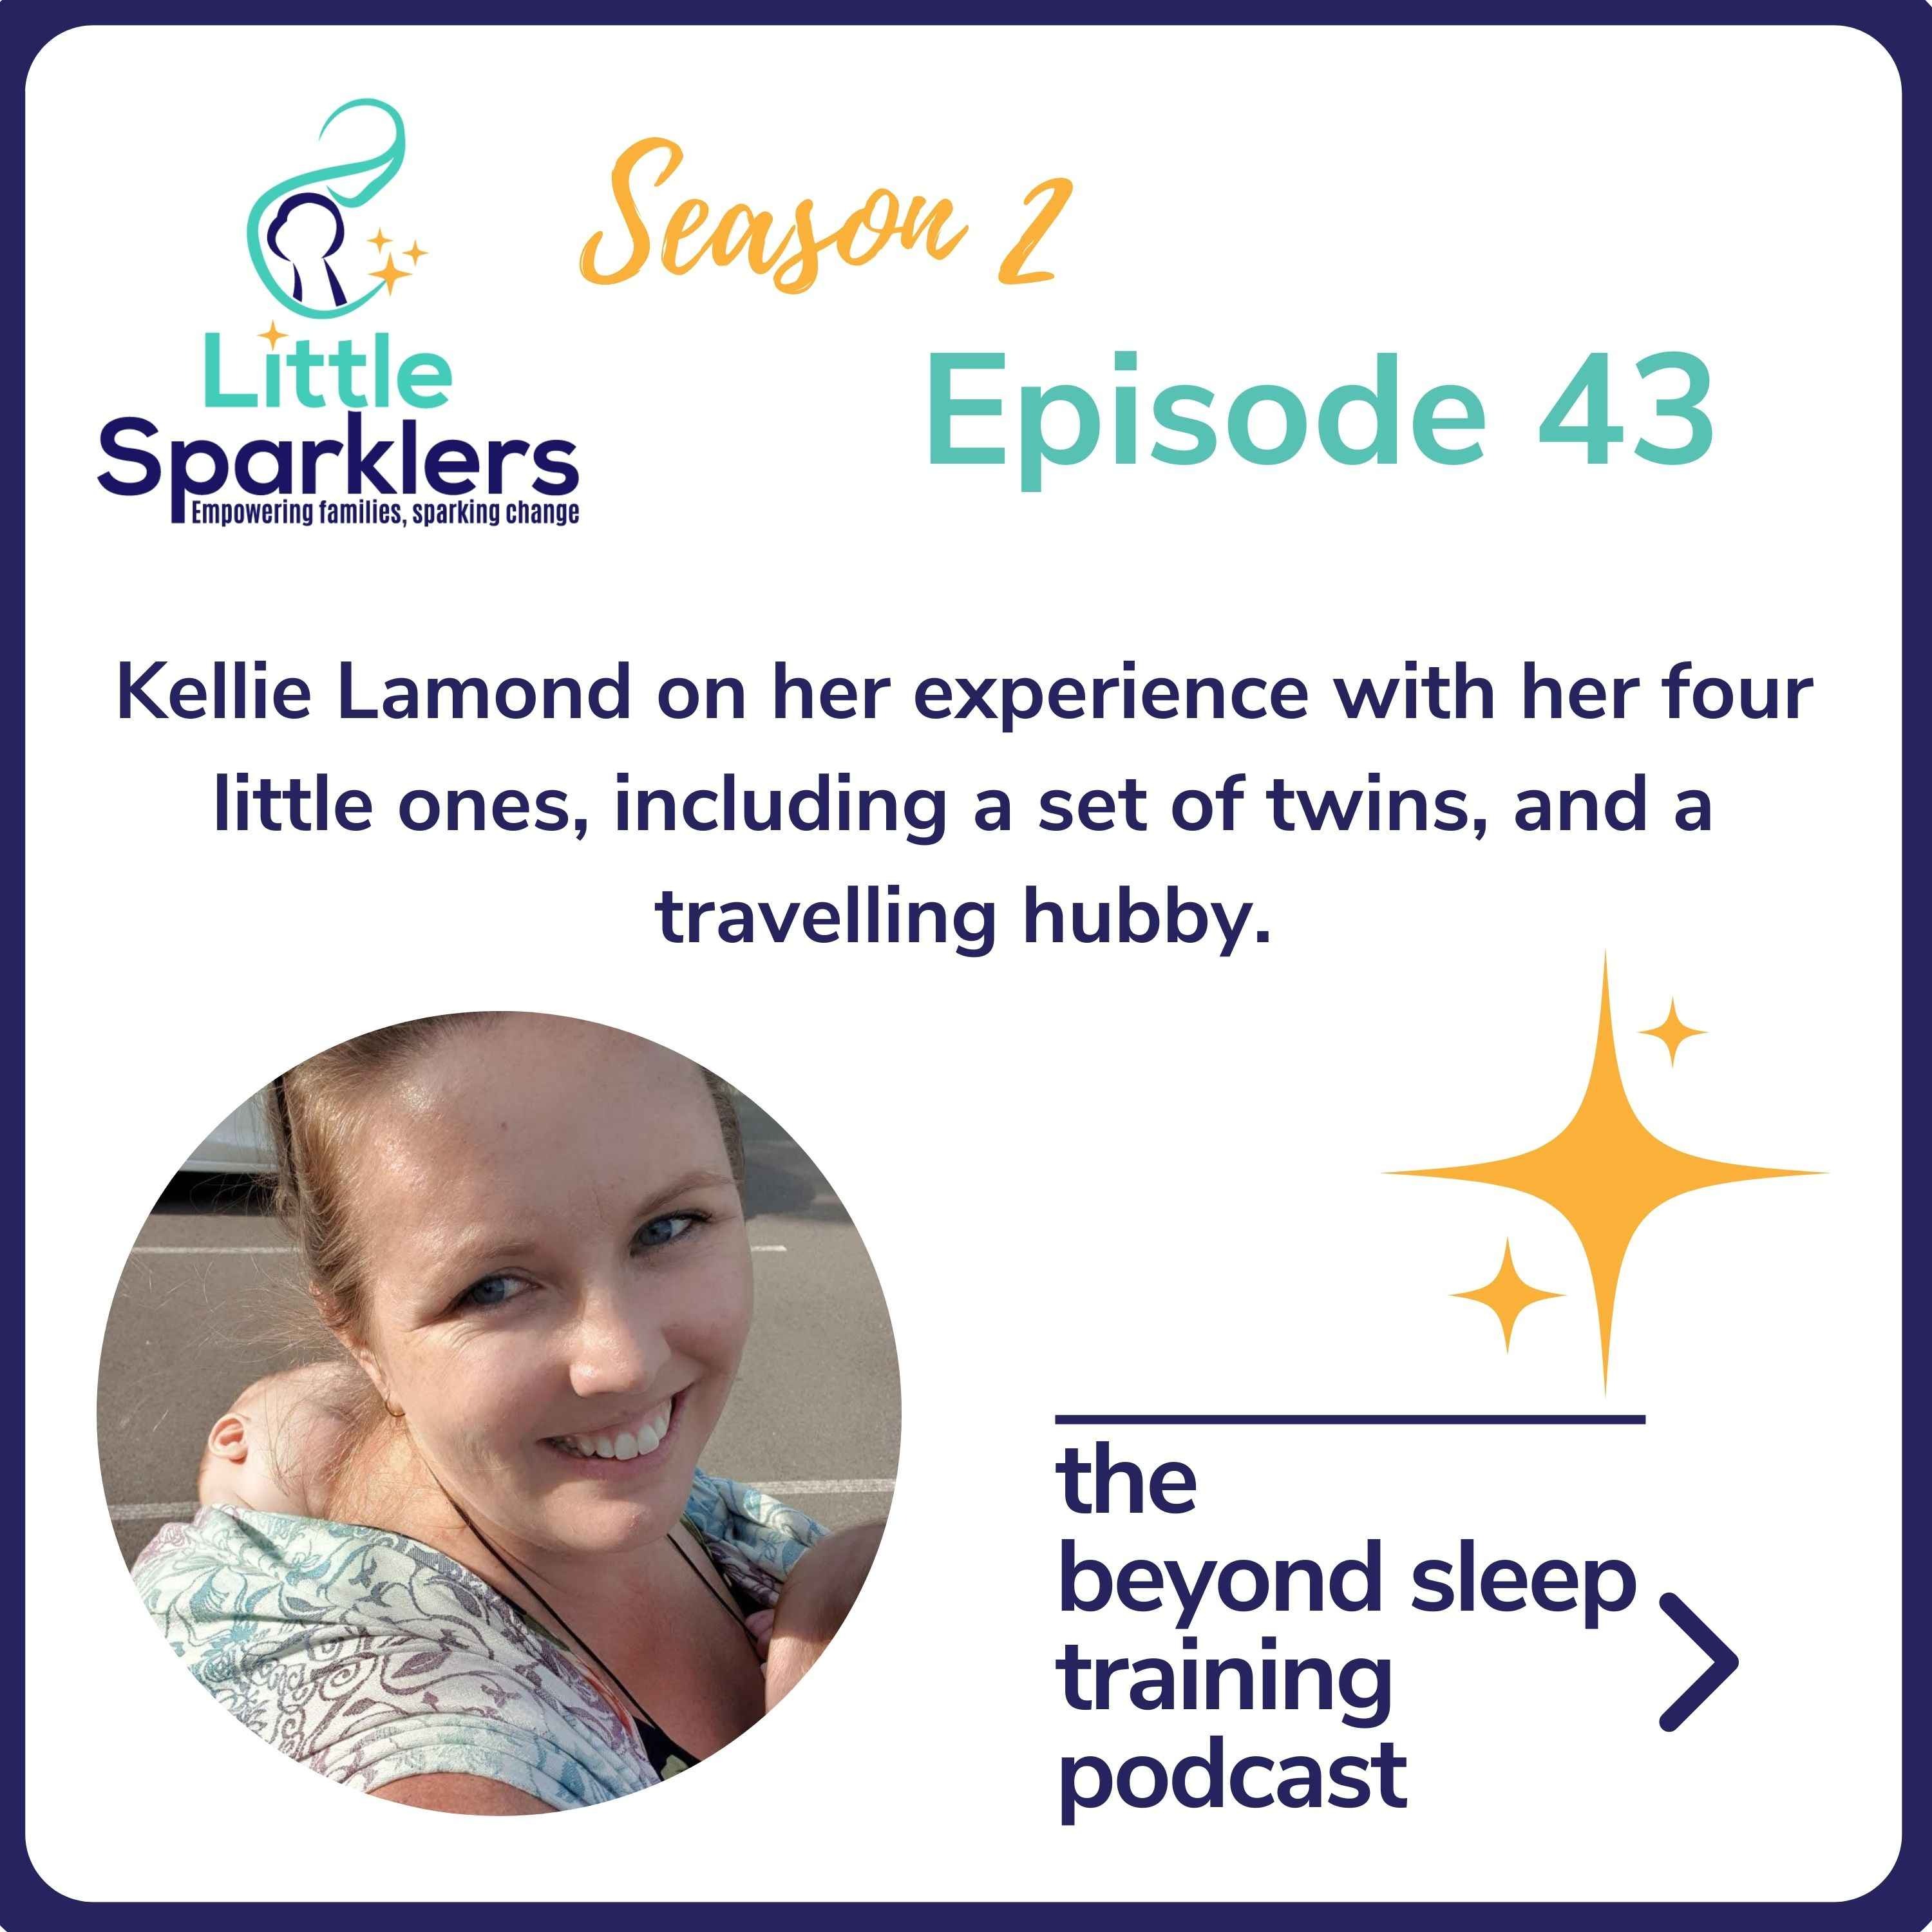 Kellie Lamond on her experience with her four little ones, including a set of twins, and a travelling hubby